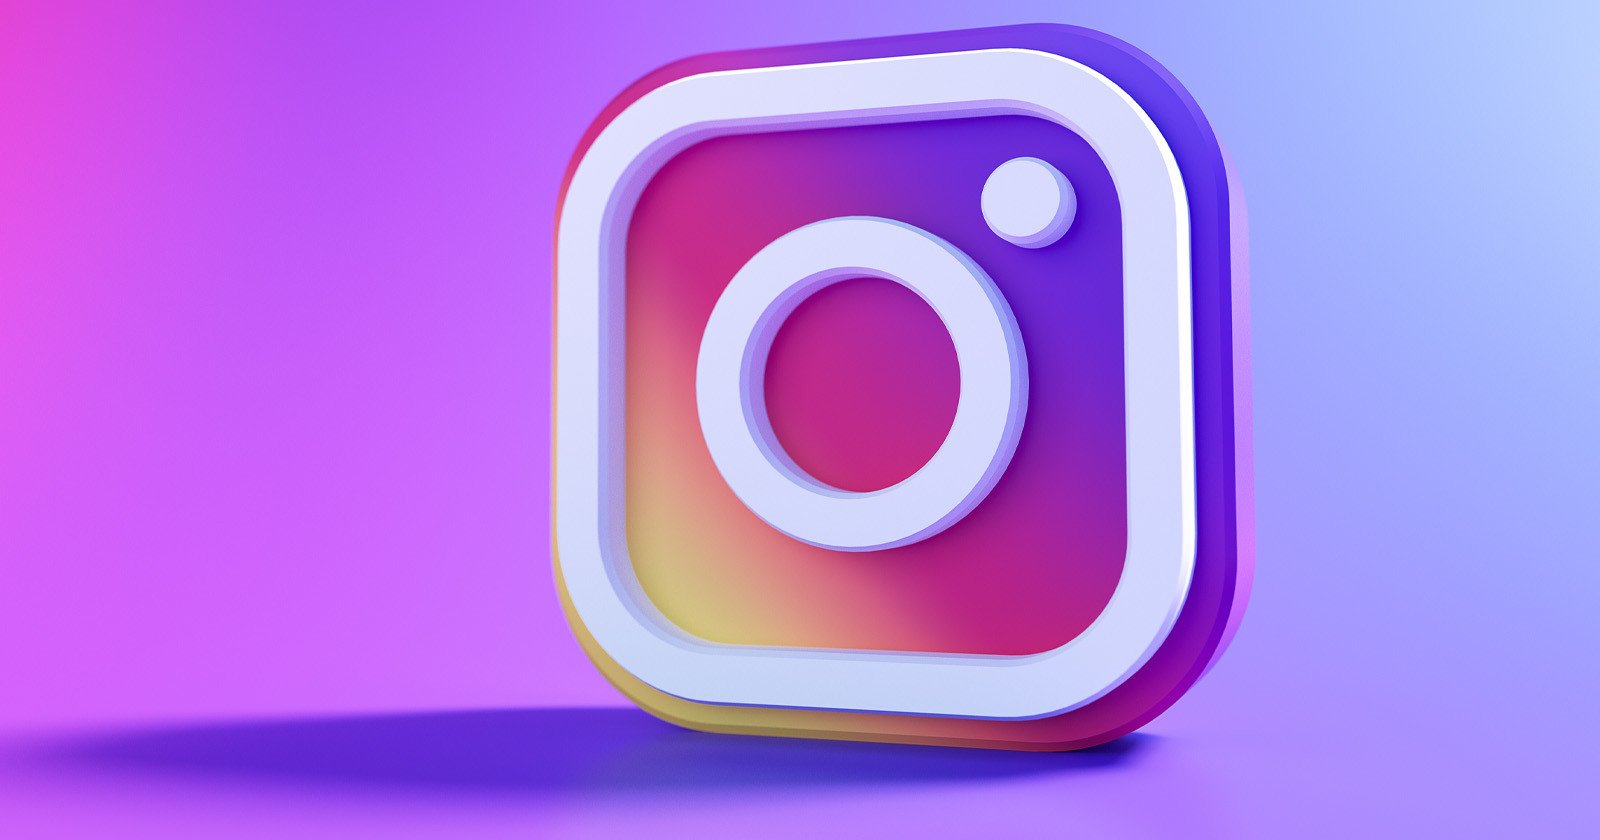  instagram was number one downloaded app globally 